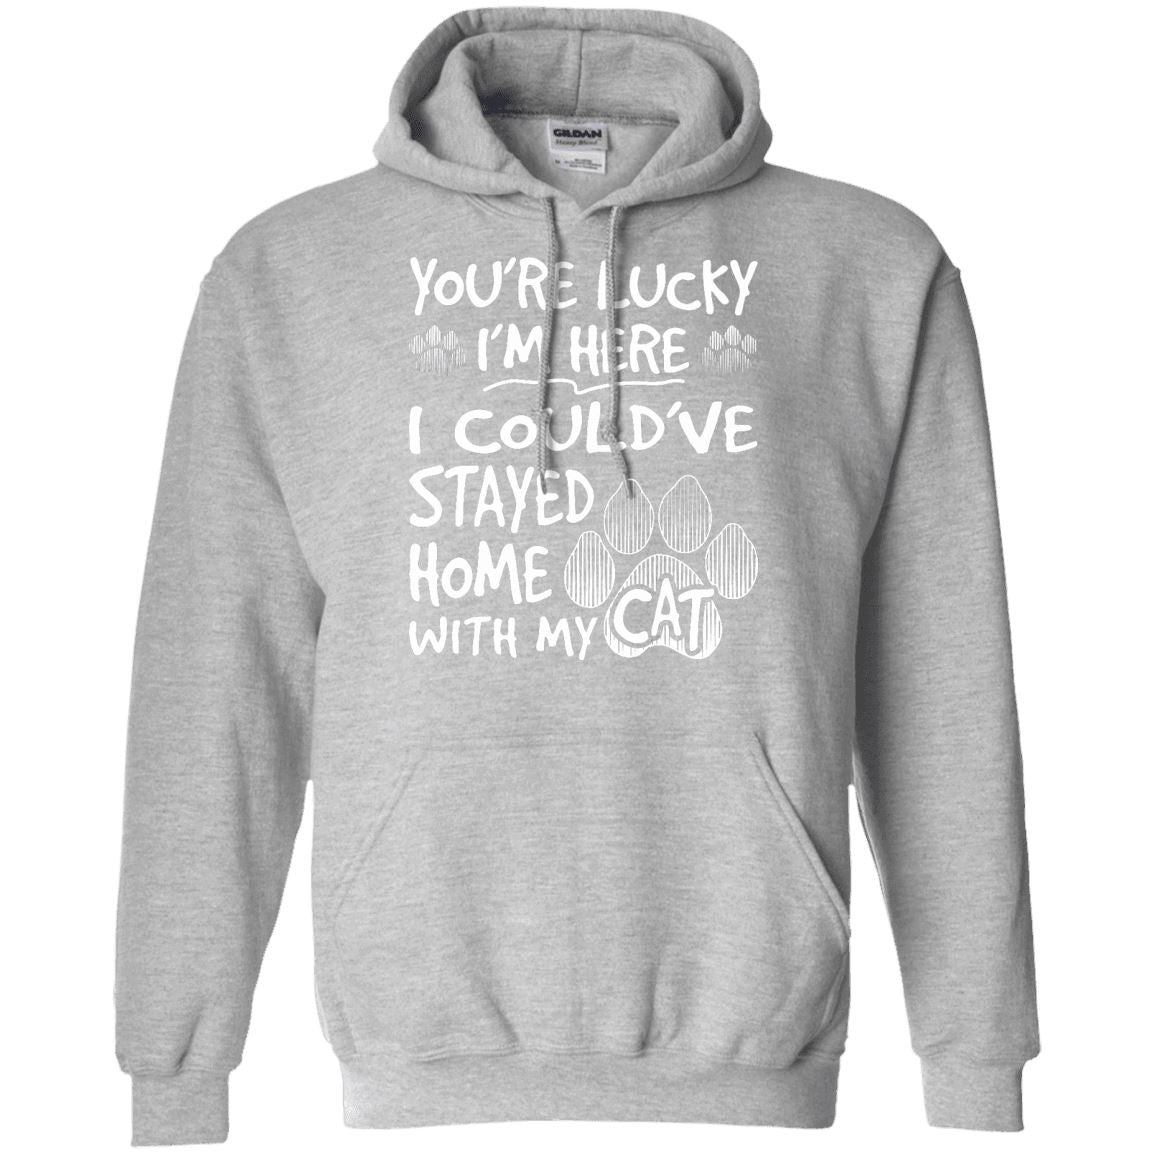 Cat Tee - You're Lucky I'm Here - CatsForLife